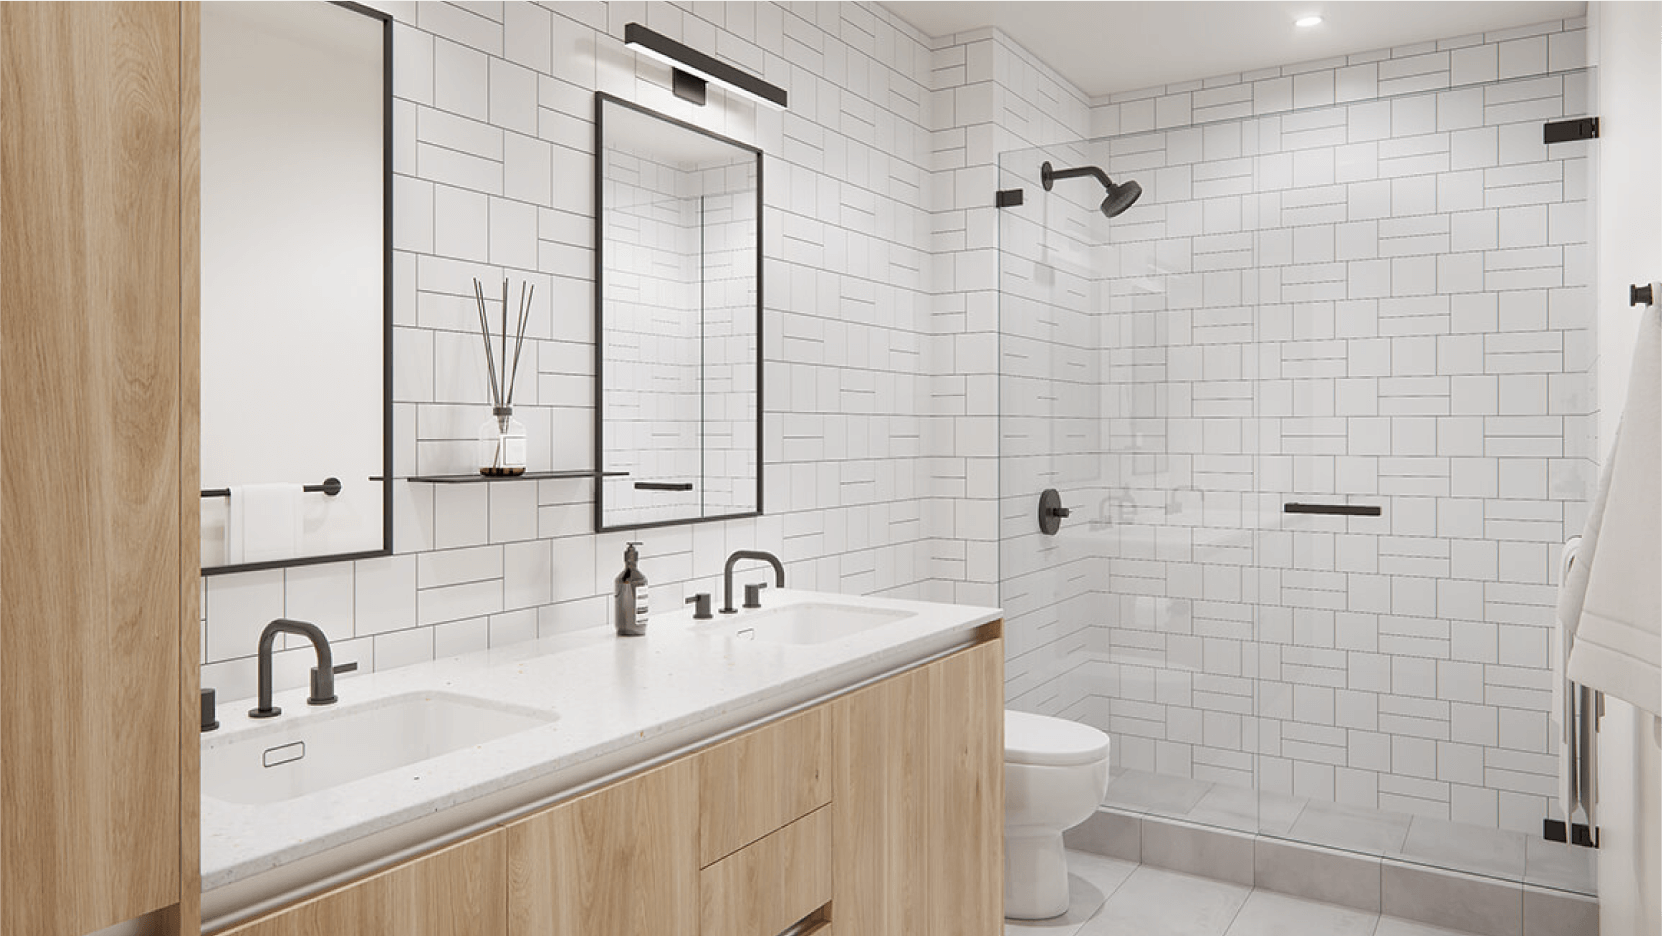 Chic and minimalist bathroom interior at Vesper ATX condos with a double vanity, subway tile walls, black hardware, and a spacious walk-in shower, reflecting luxury urban living.